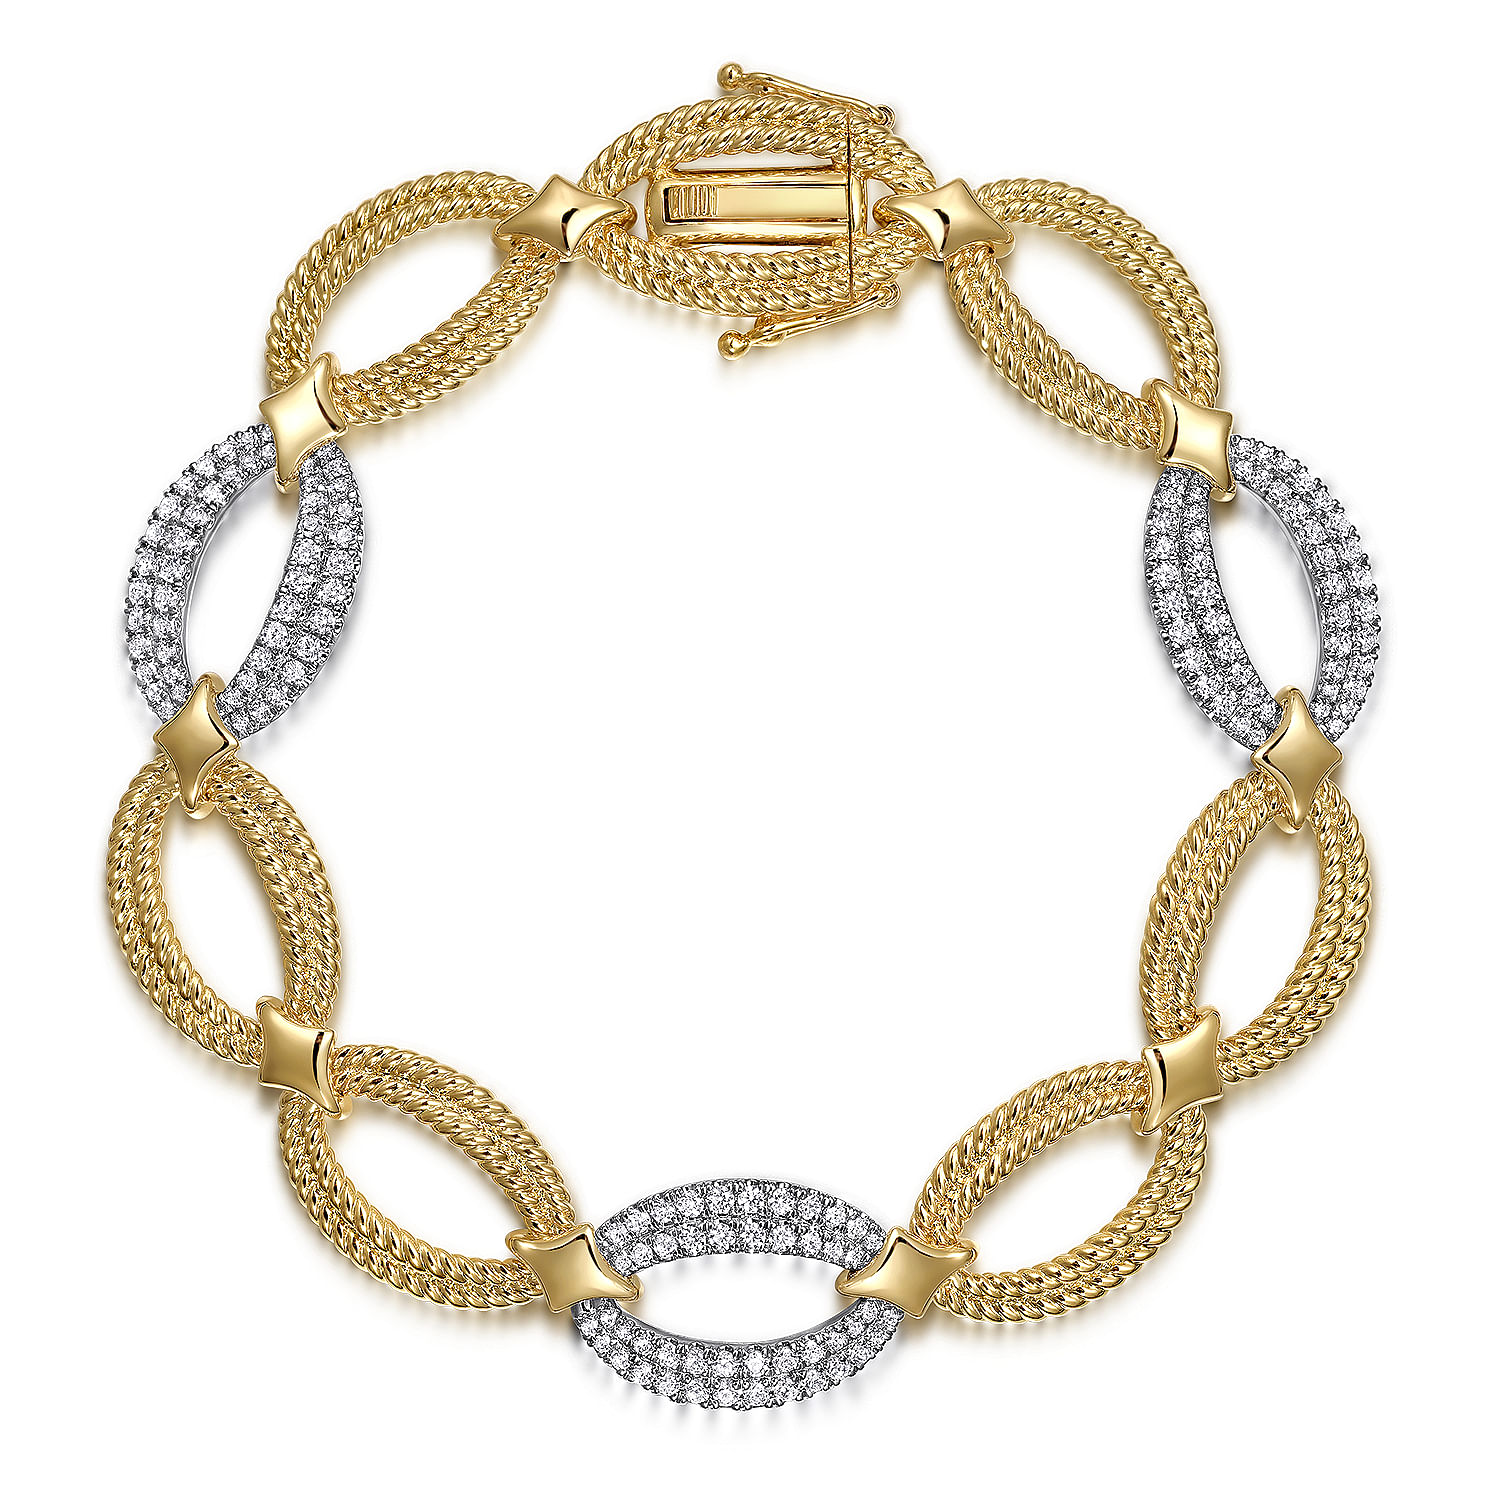 14K White and Yellow Gold Diamond Rope Link Chain Bracelet